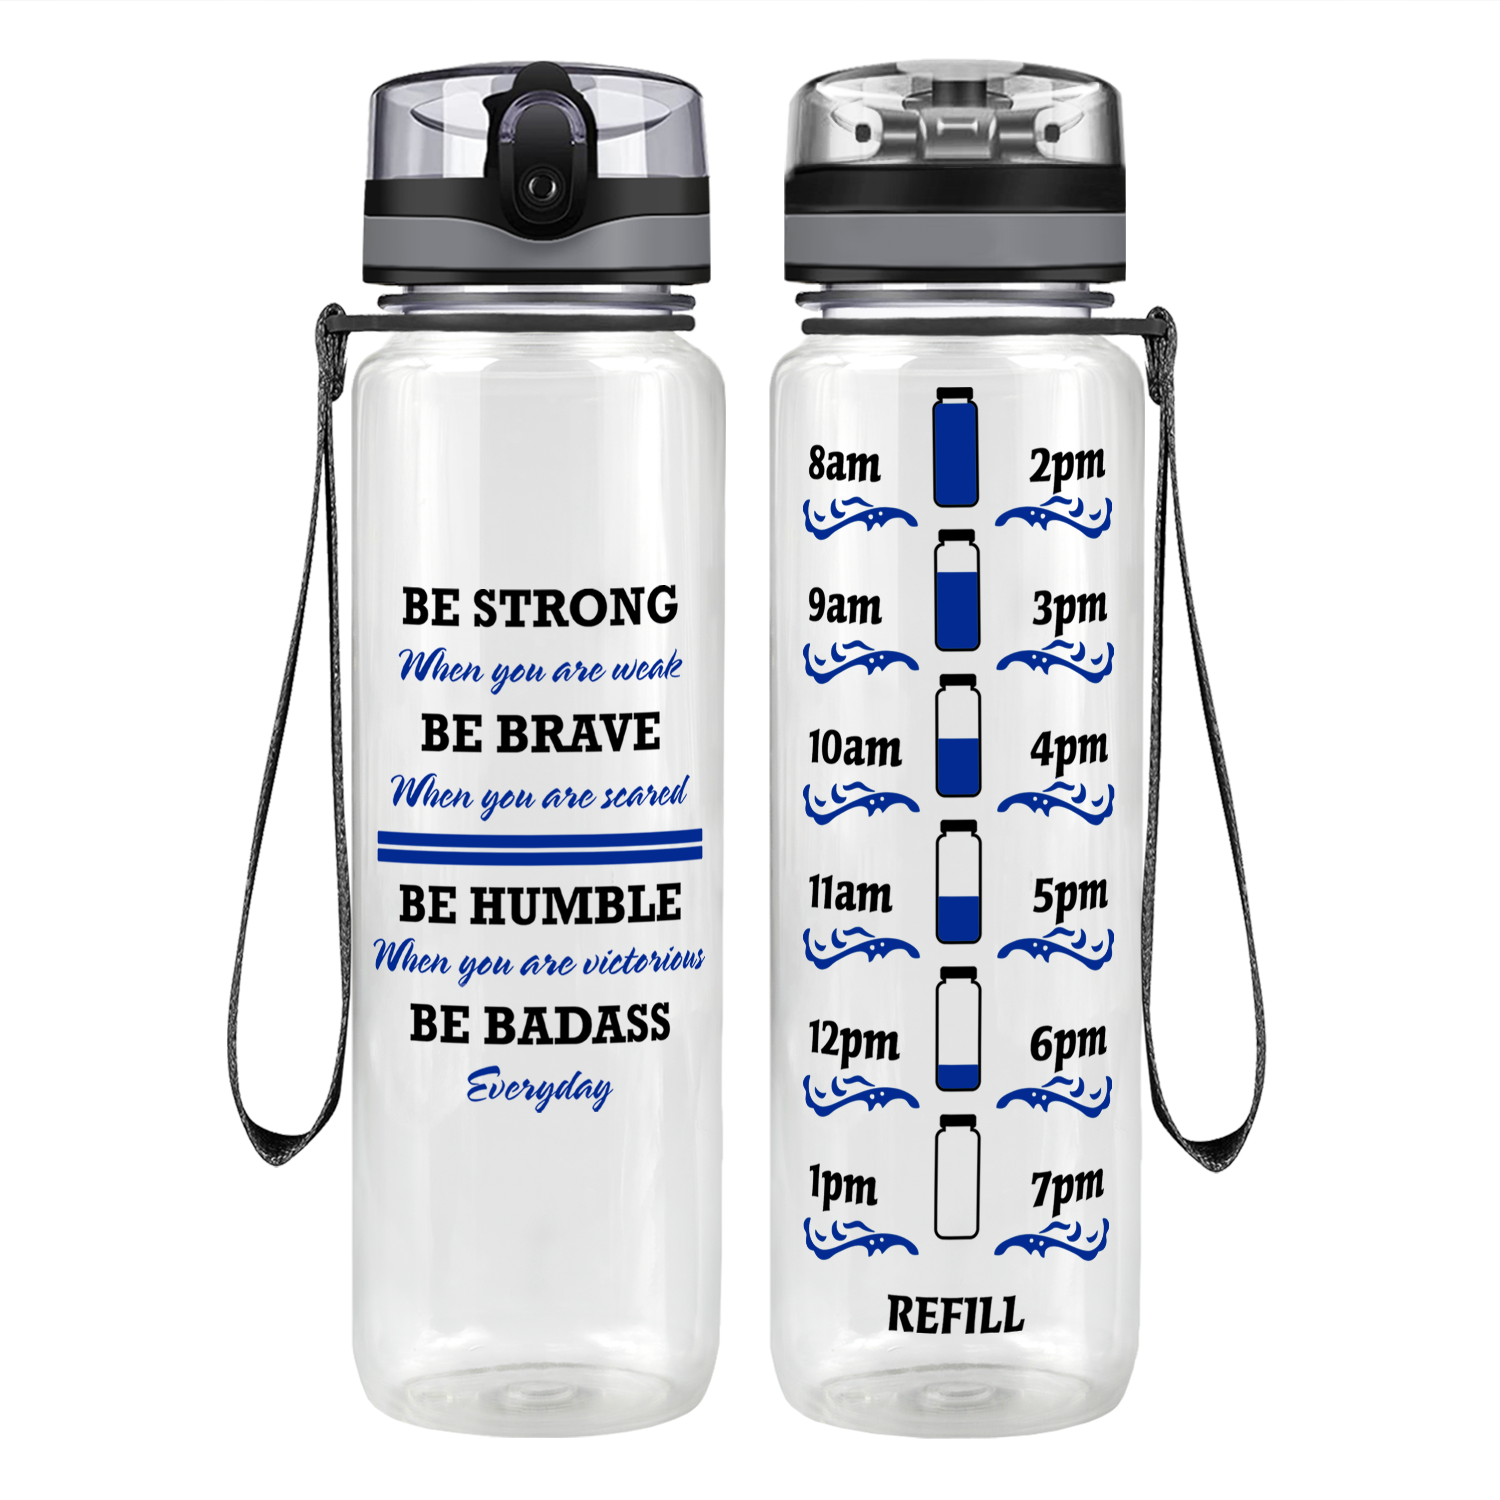 Be Strong When You are Weak Motivational Tracking Water Bottle